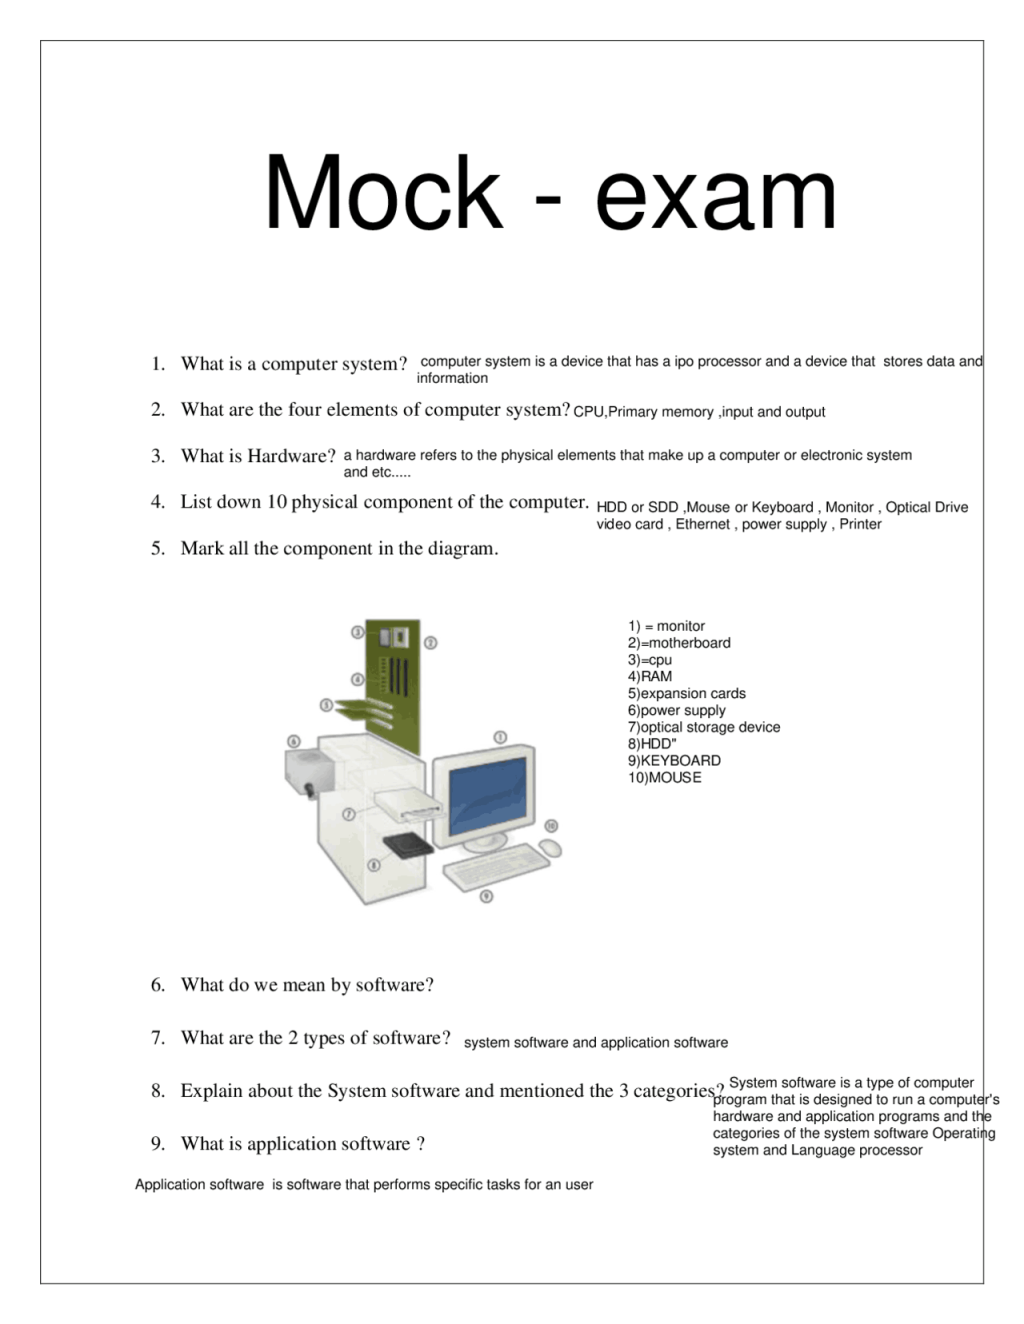 printing technology mock test - Mock Exam - Information  Exams Computer science  Docsity